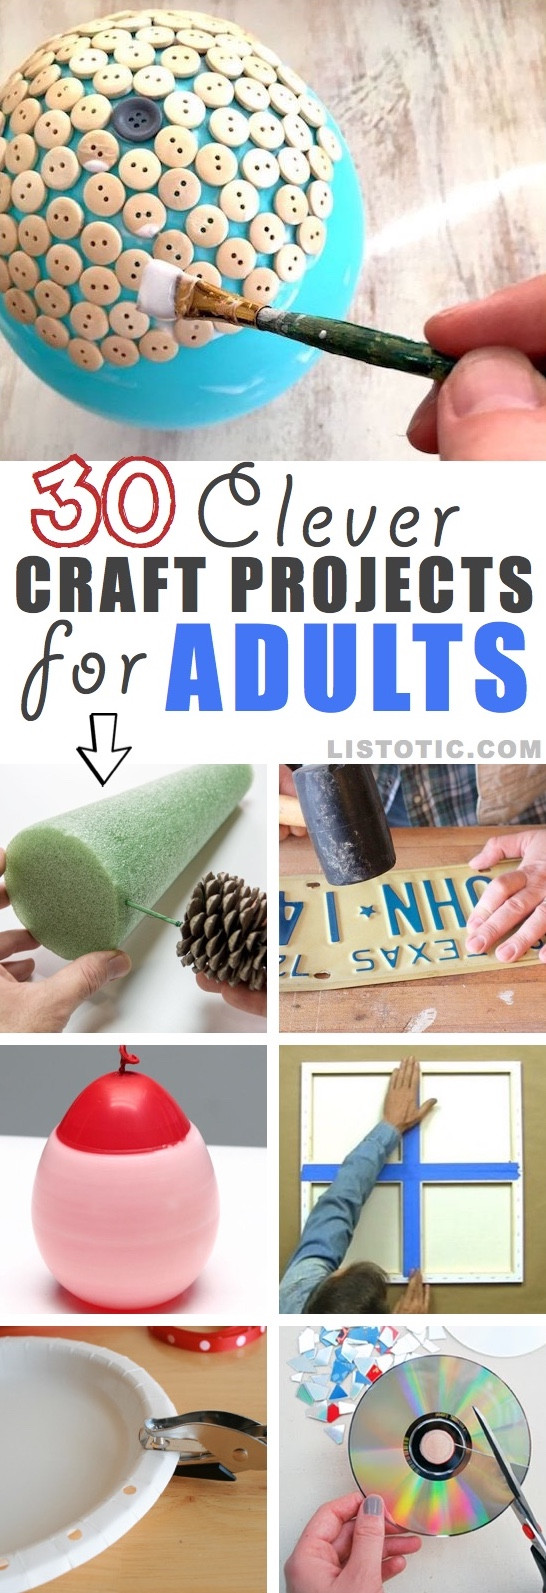 Crafting Ideas For Adults
 10 Creative Craft Ideas For Adults Amately